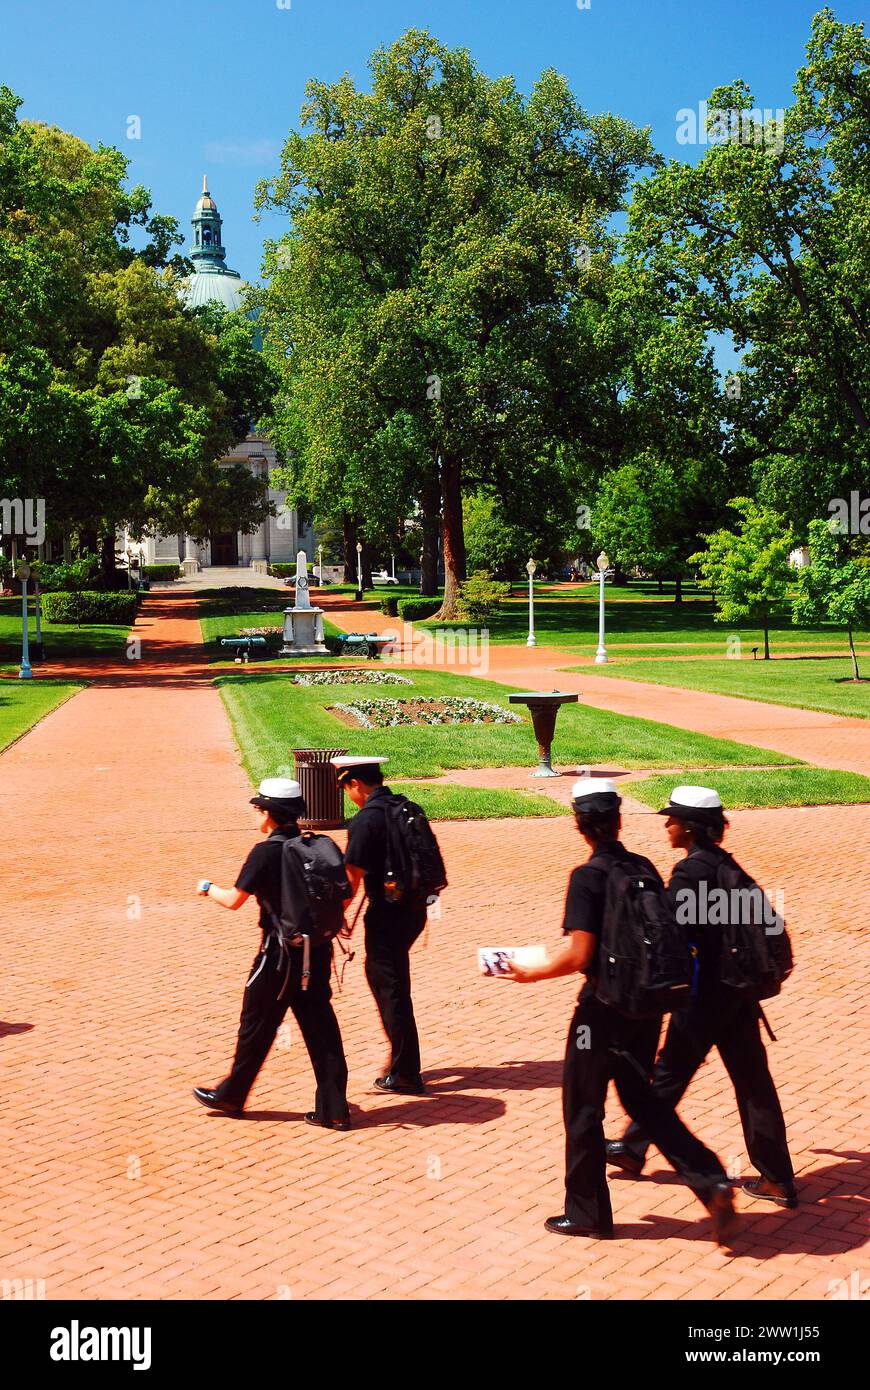 Midshipman at the US Naval Academy in Annapolis walk across their campus in uniform Stock Photo